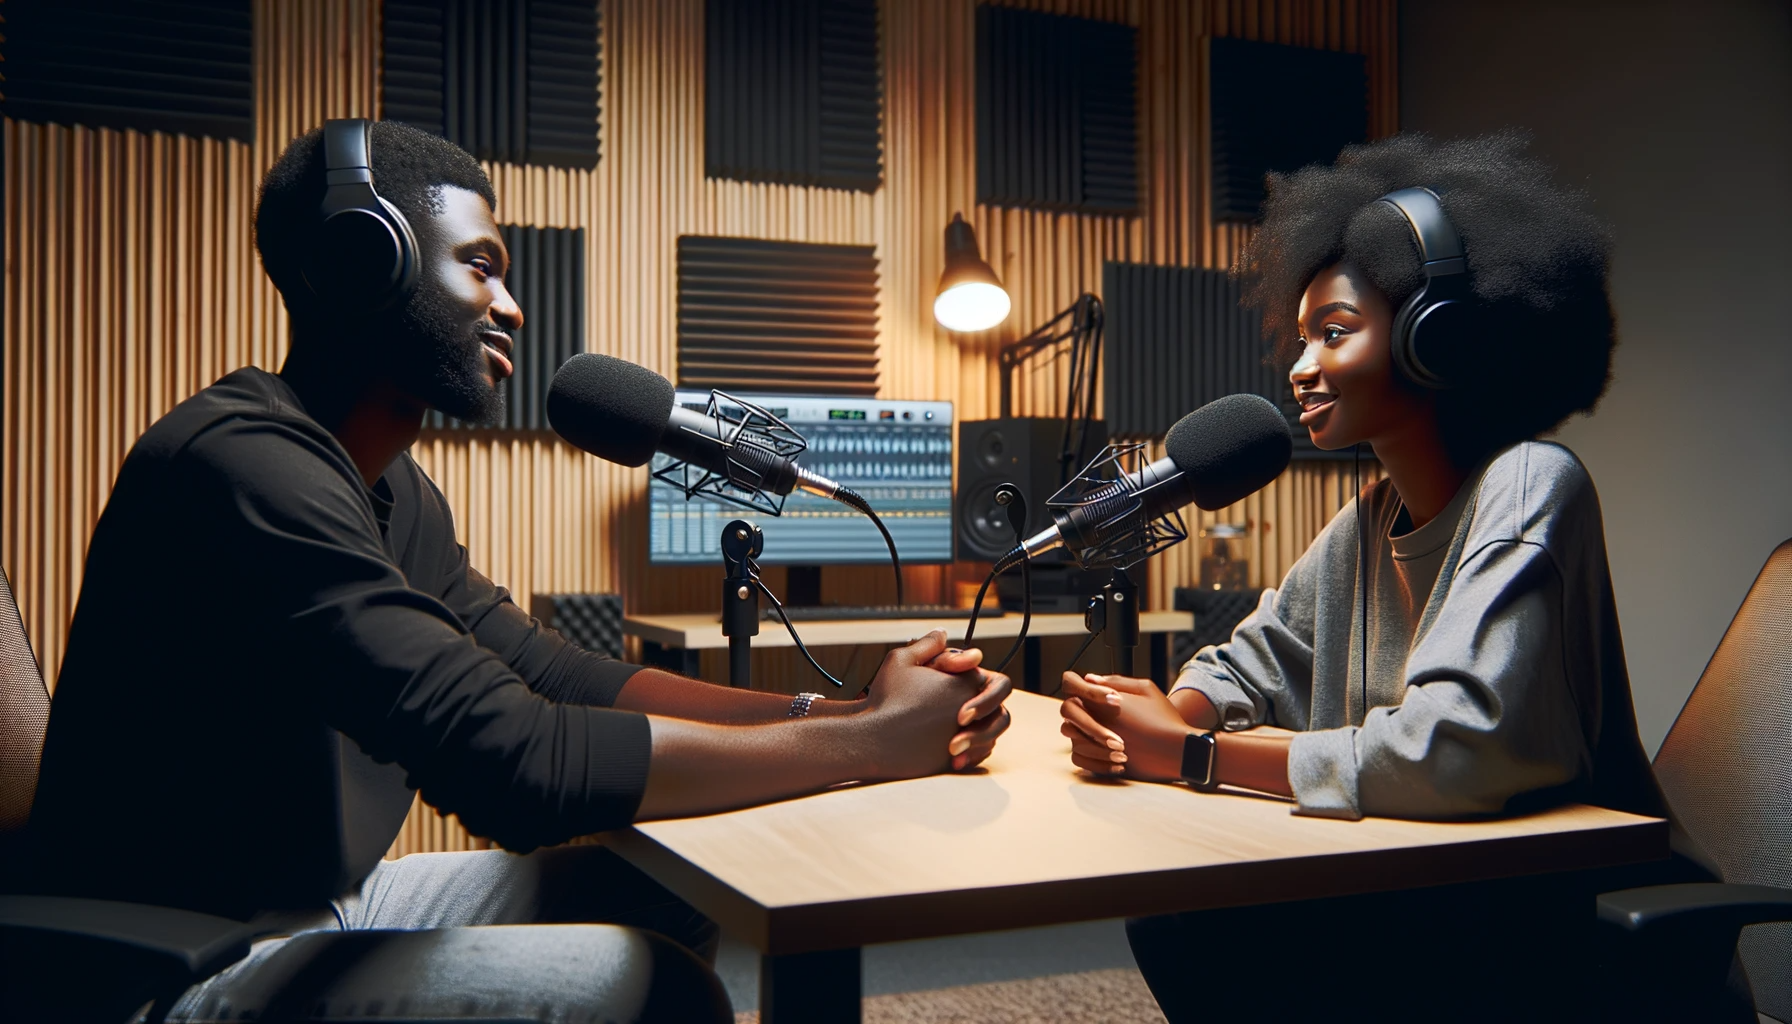 From Culture to Cinema: The Absolute Best Black Podcast